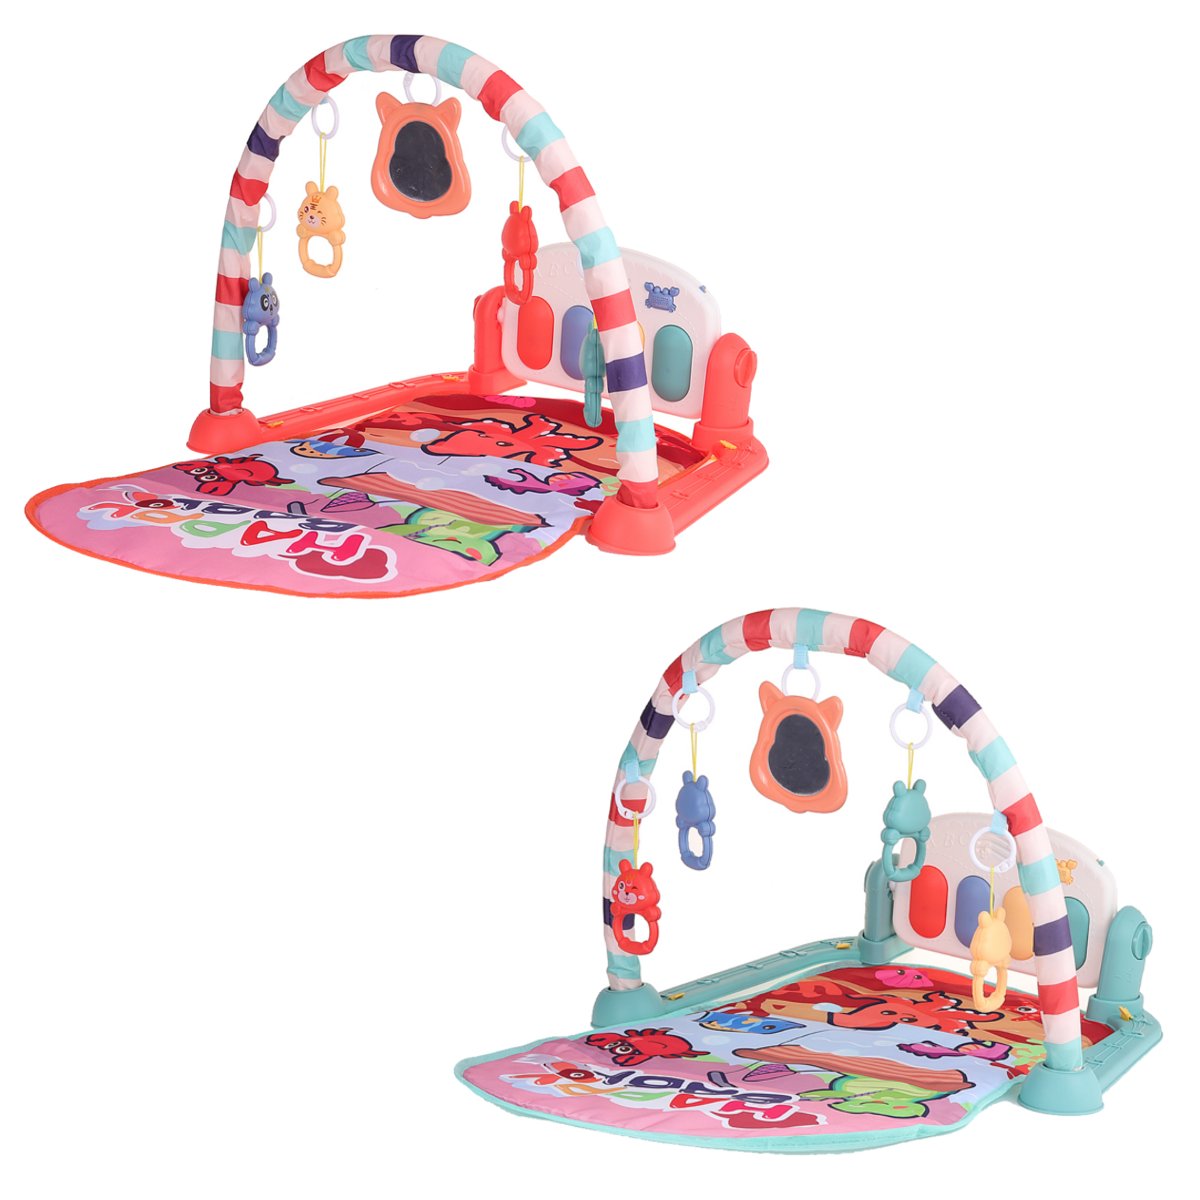 765643CM-2-IN-1-Multi-functional-Baby-Gym-with-Play-Mat-Keyboard-Soft-Light-Rattle-Toys-for-Baby-Gif-1709556-4